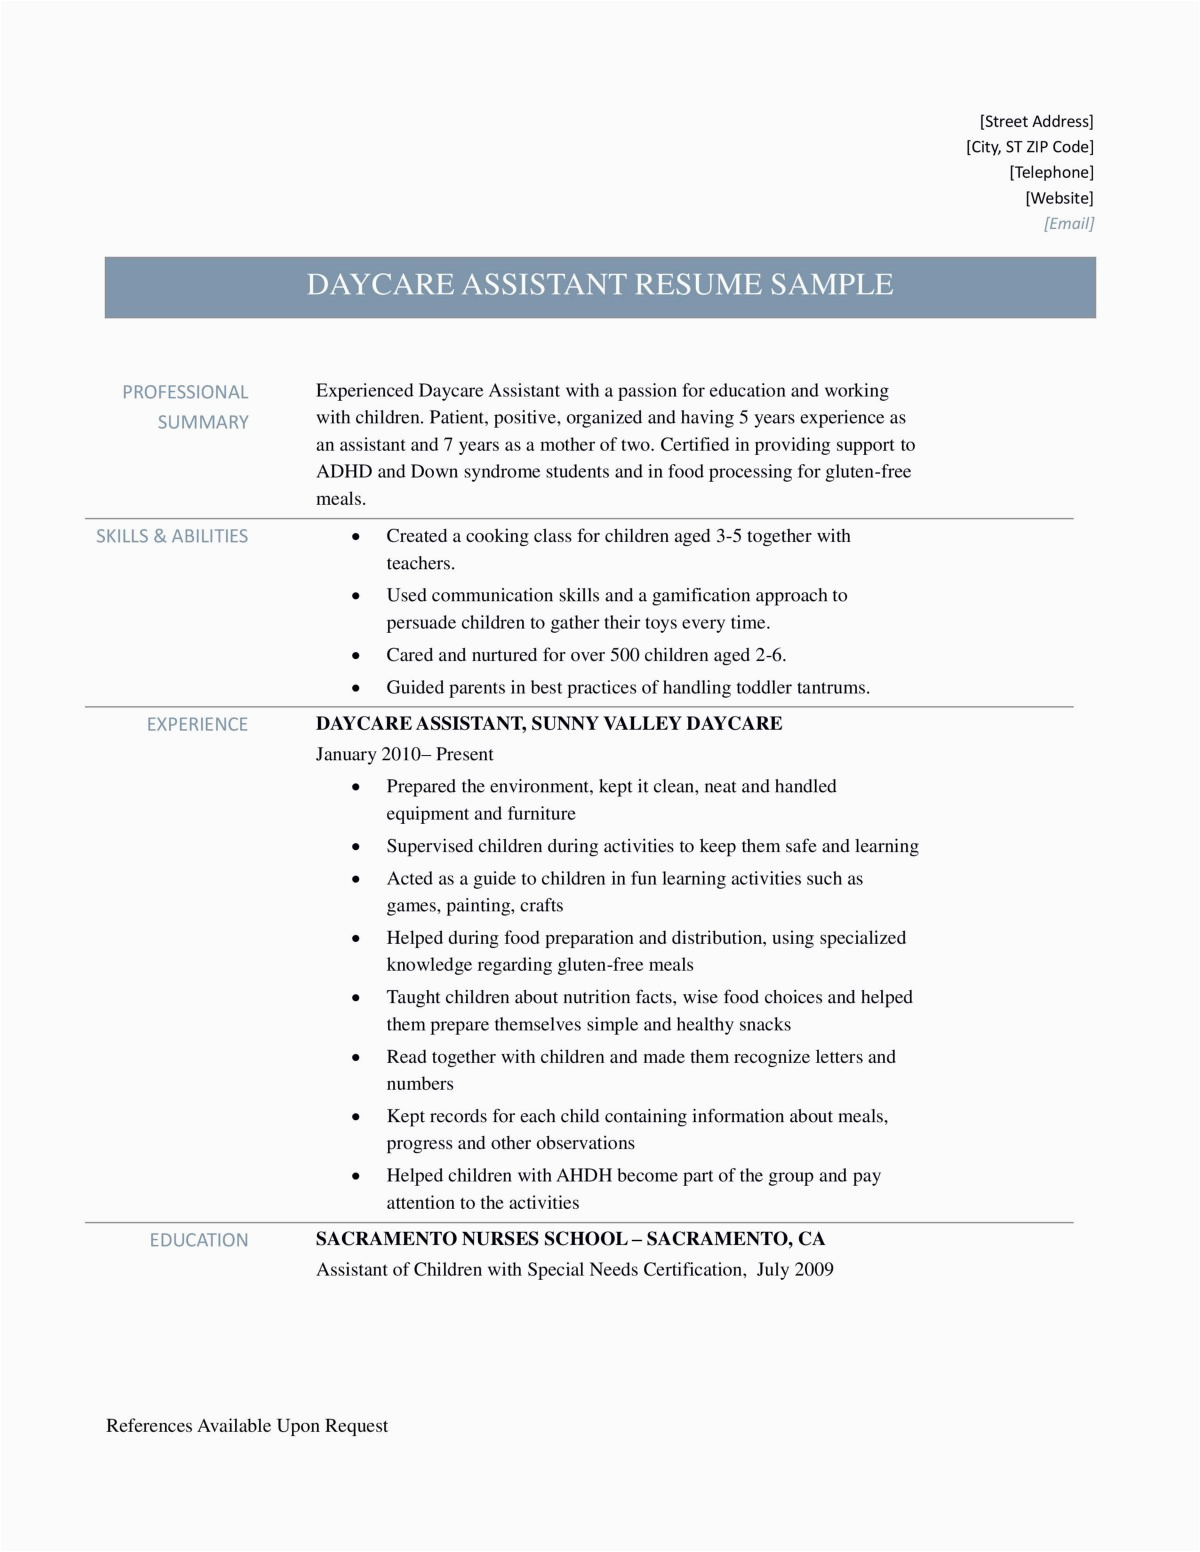 Sample Resume for Teachers assistant In Daycare Center Daycare assistant Resume Samples Tips and Templates